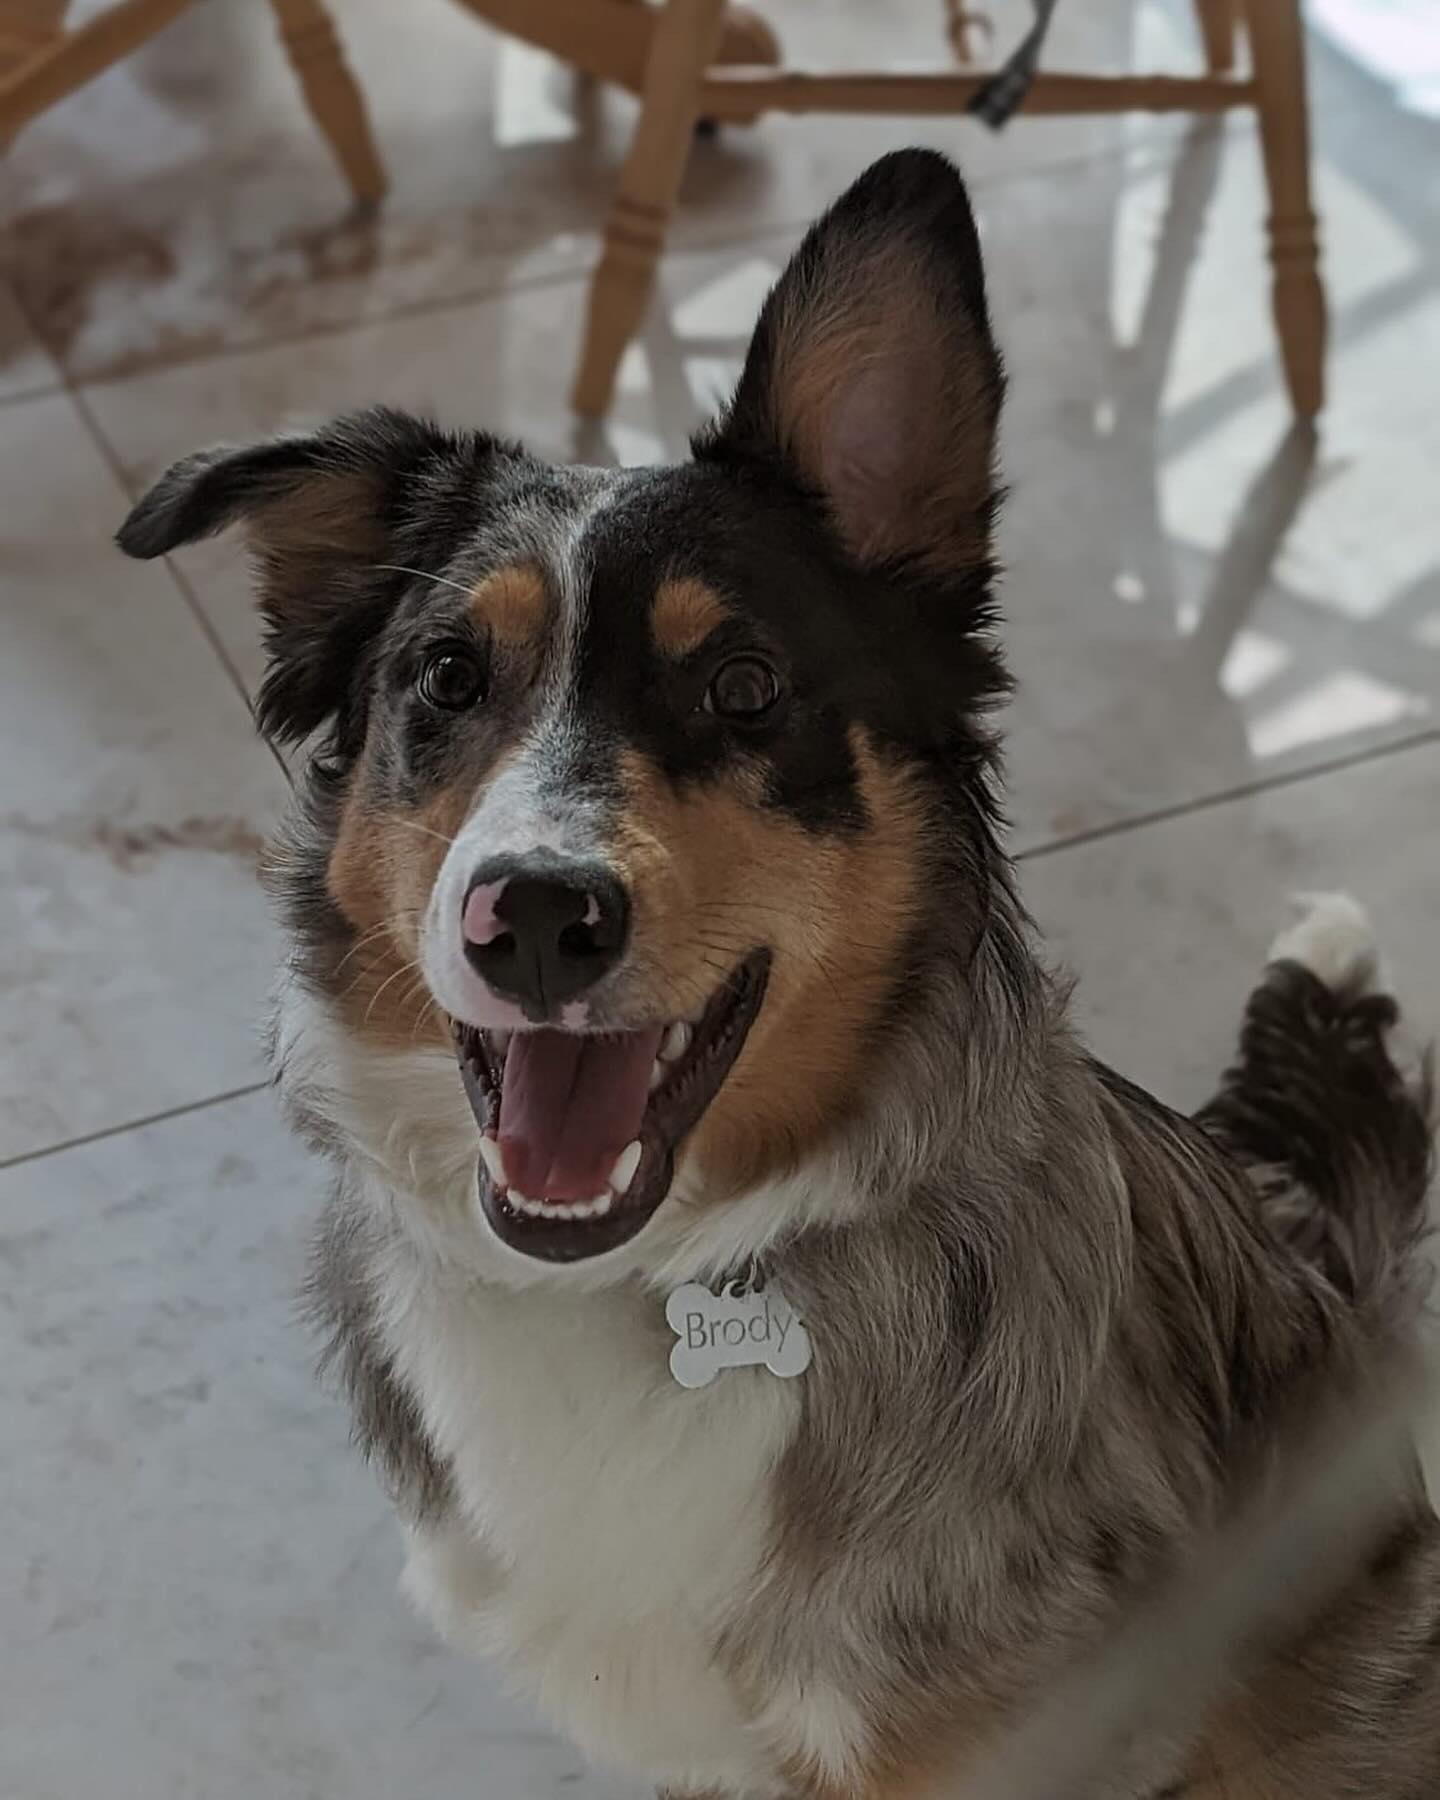 Seven-month-old collie Brody is up for adoption at the Haven Rescue Centre